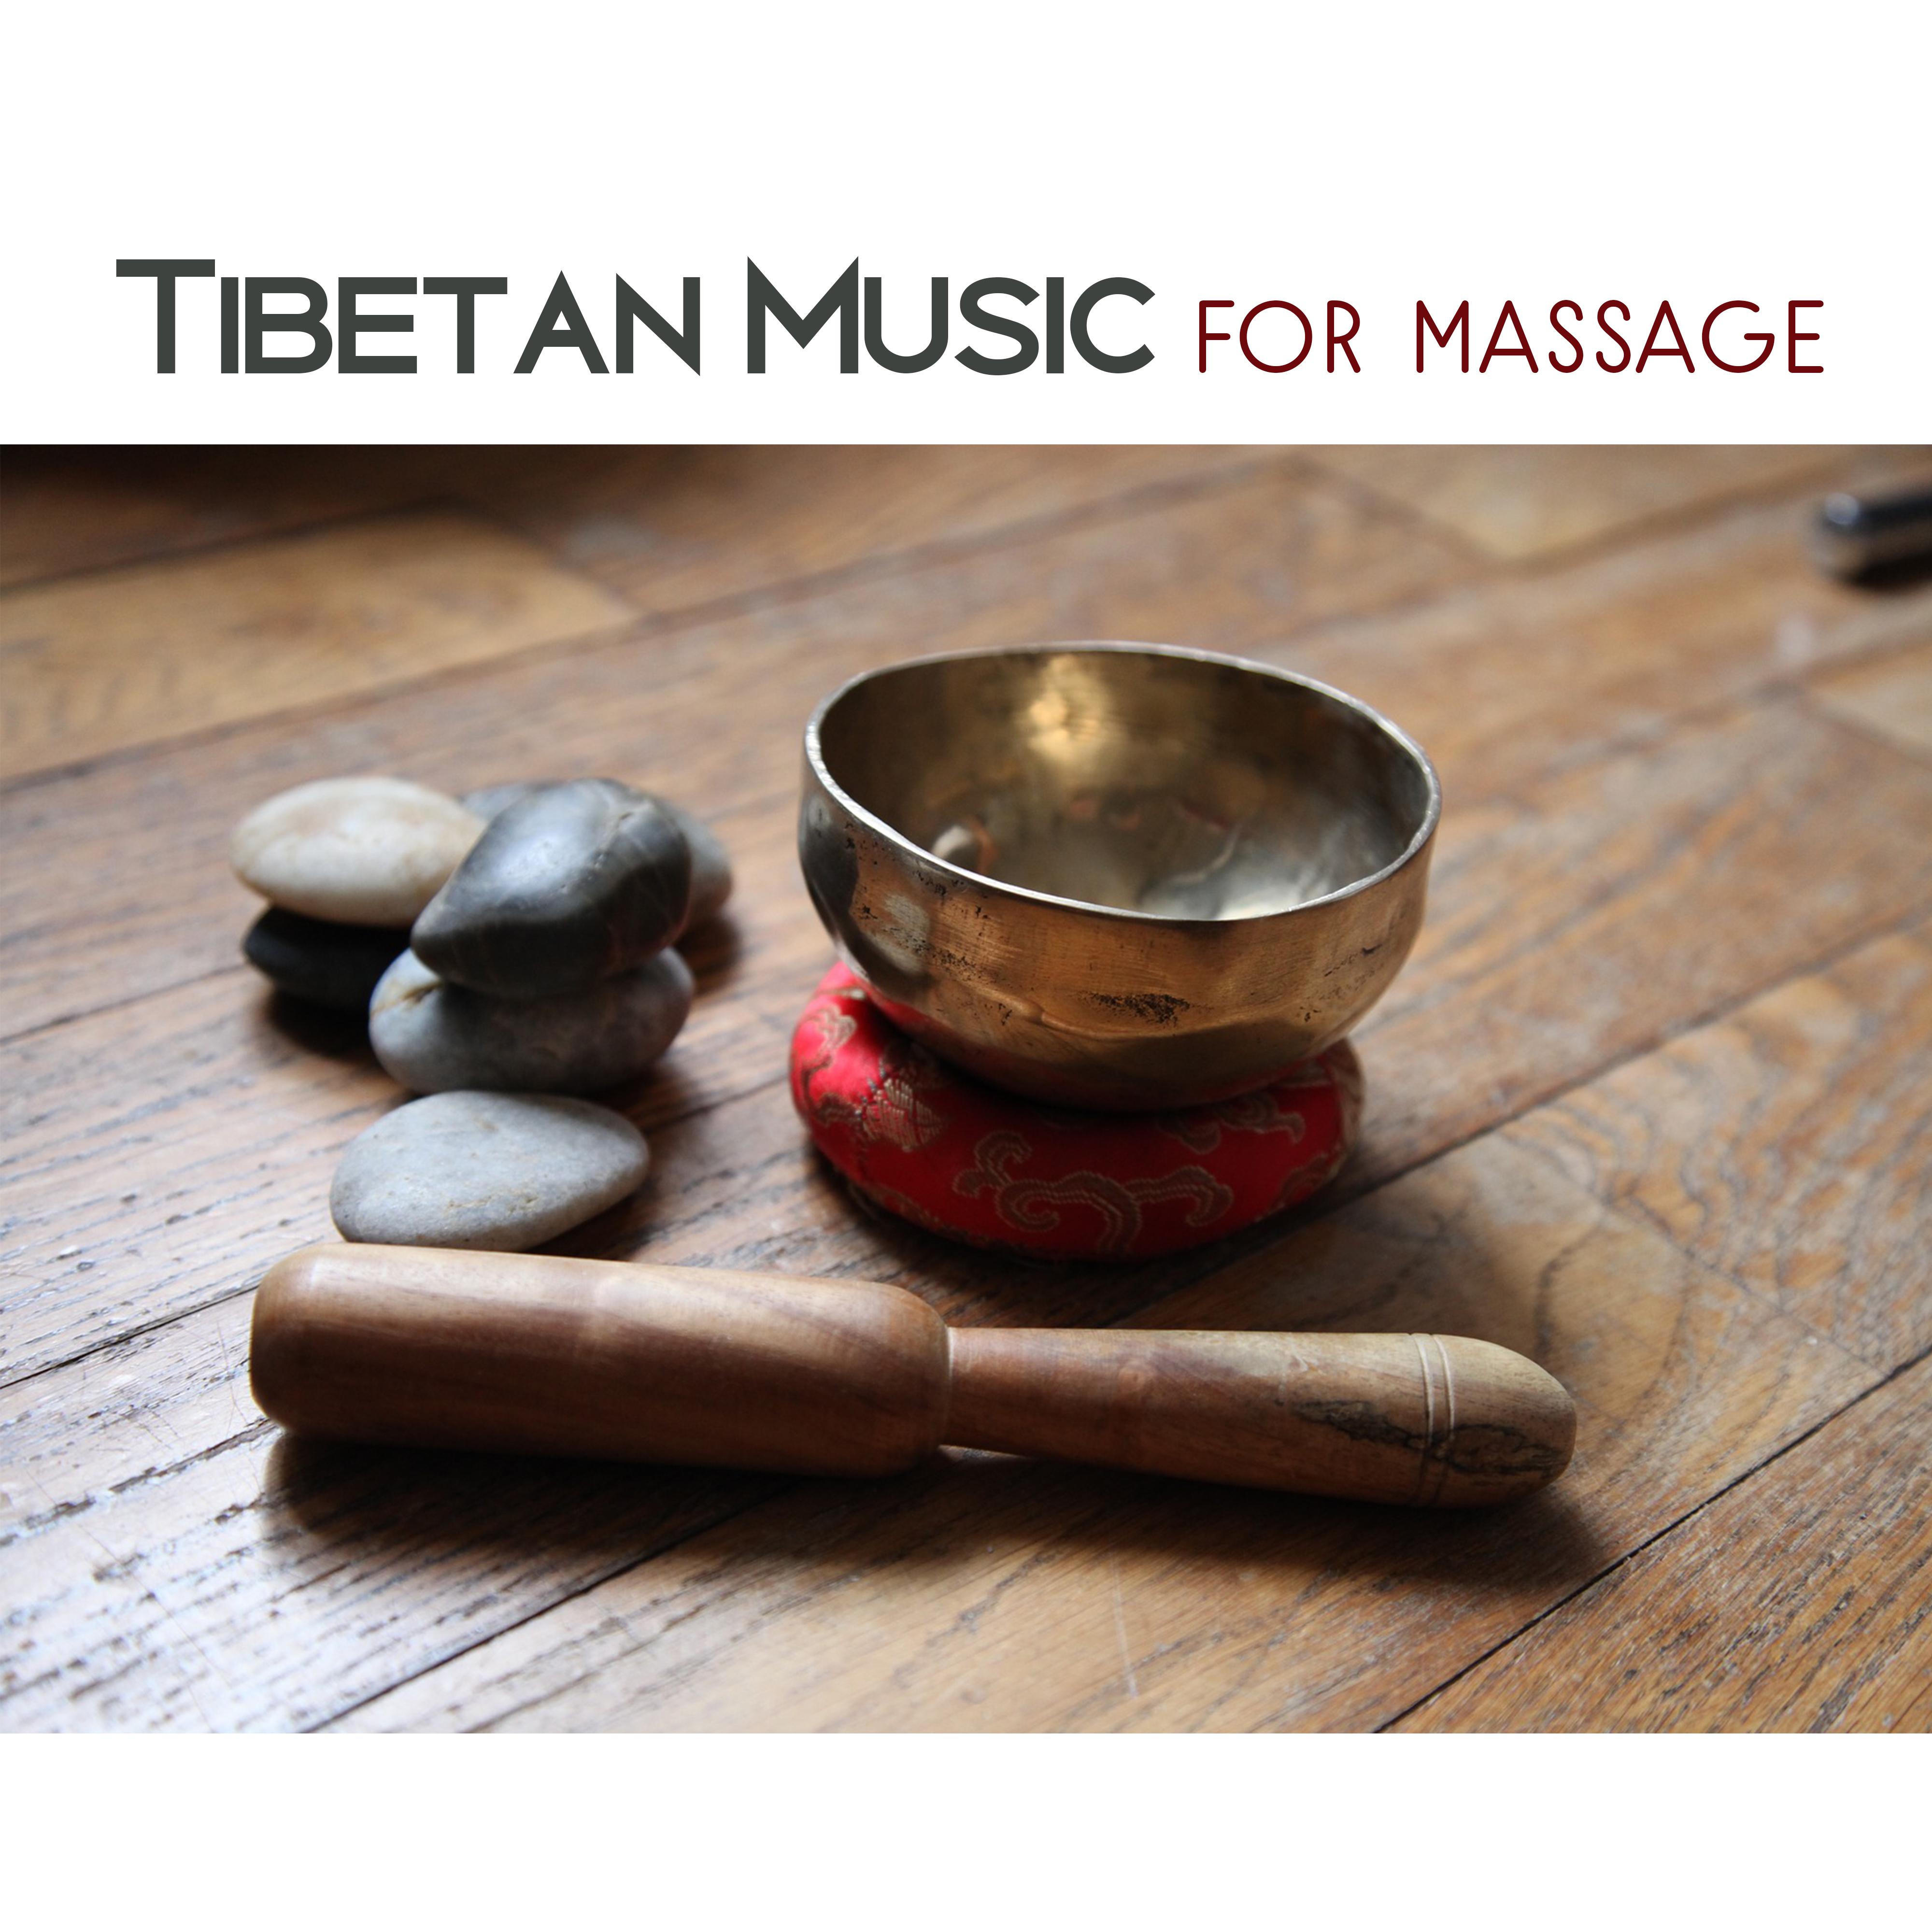 Tibetan Music for Massage – Stress Relief Sounds, Spa Music, Relaxation Wellness, Peaceful Mind, Spa Dreams, Flute Music, Soothing Piano, Relaxed Mind